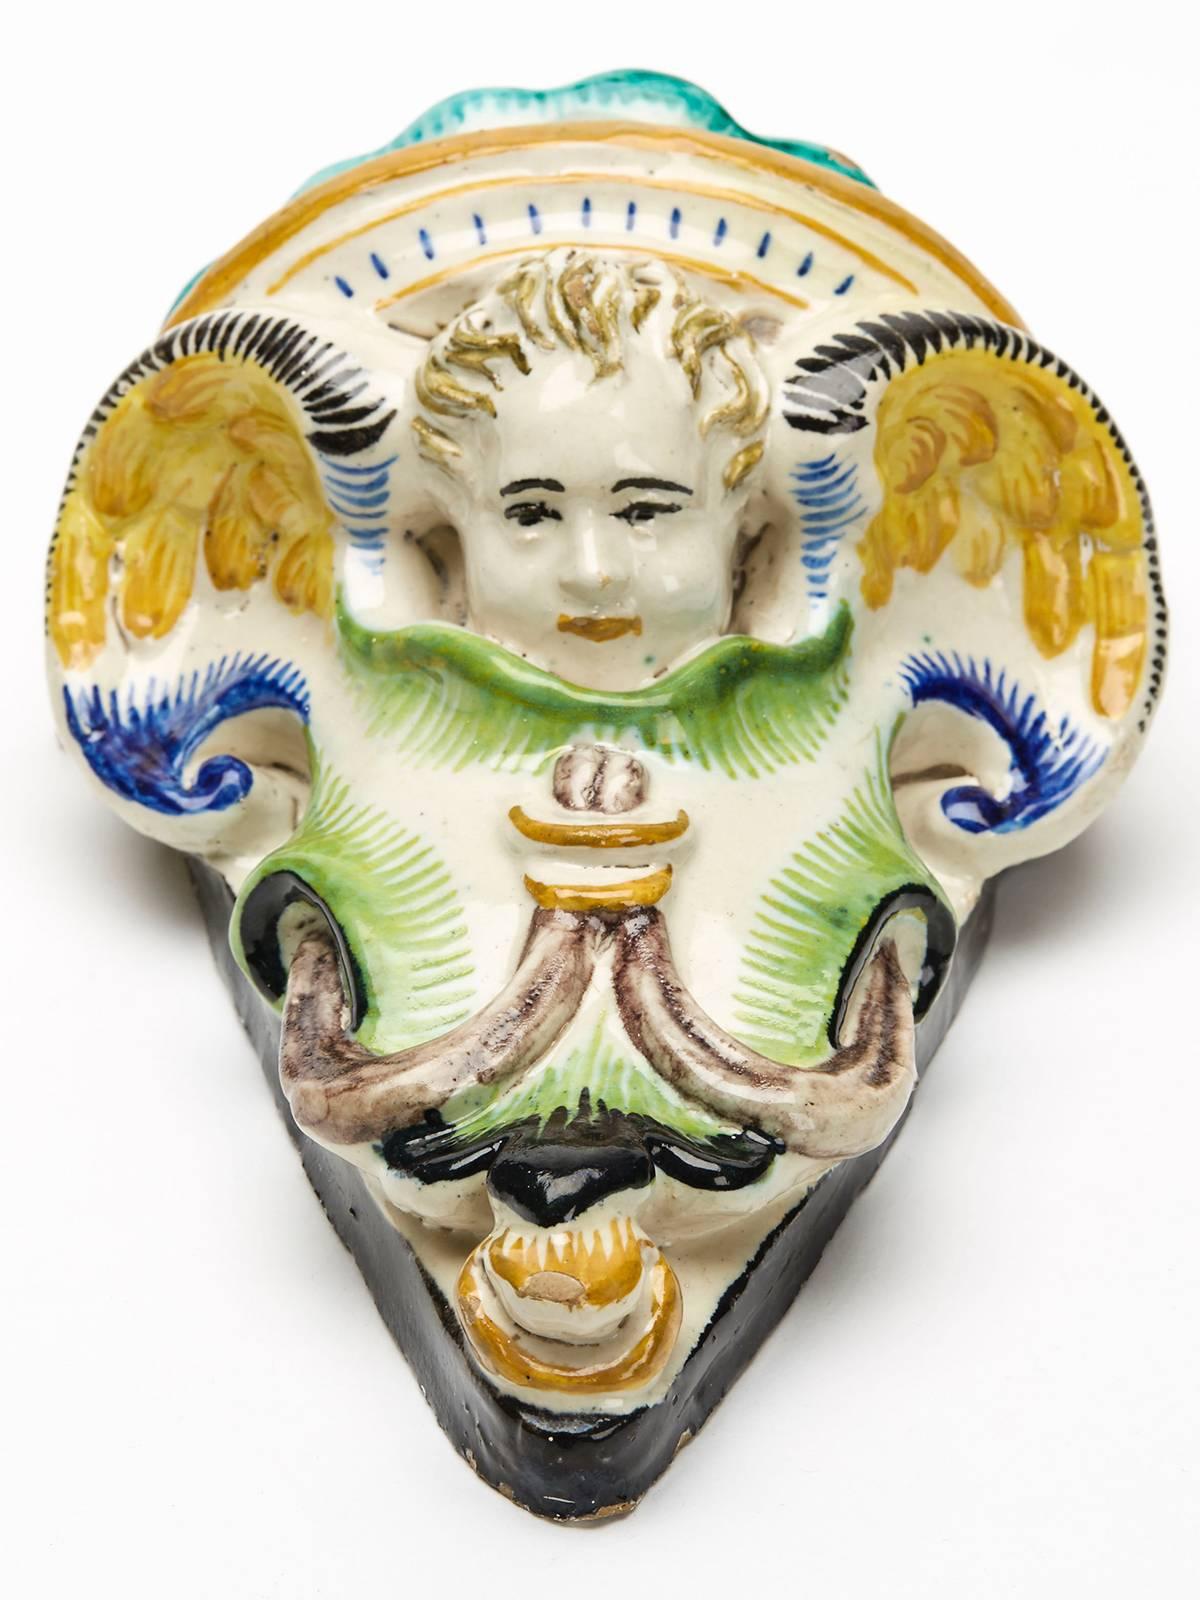 A stunning and rare antique Italian Cantagalli Maiolica pottery wall pocket moulded with a winged cherub set within a scroll design surround with hanging tassels. The pocket is hand-painted in coloured enamels on a cream coloured ground with a black